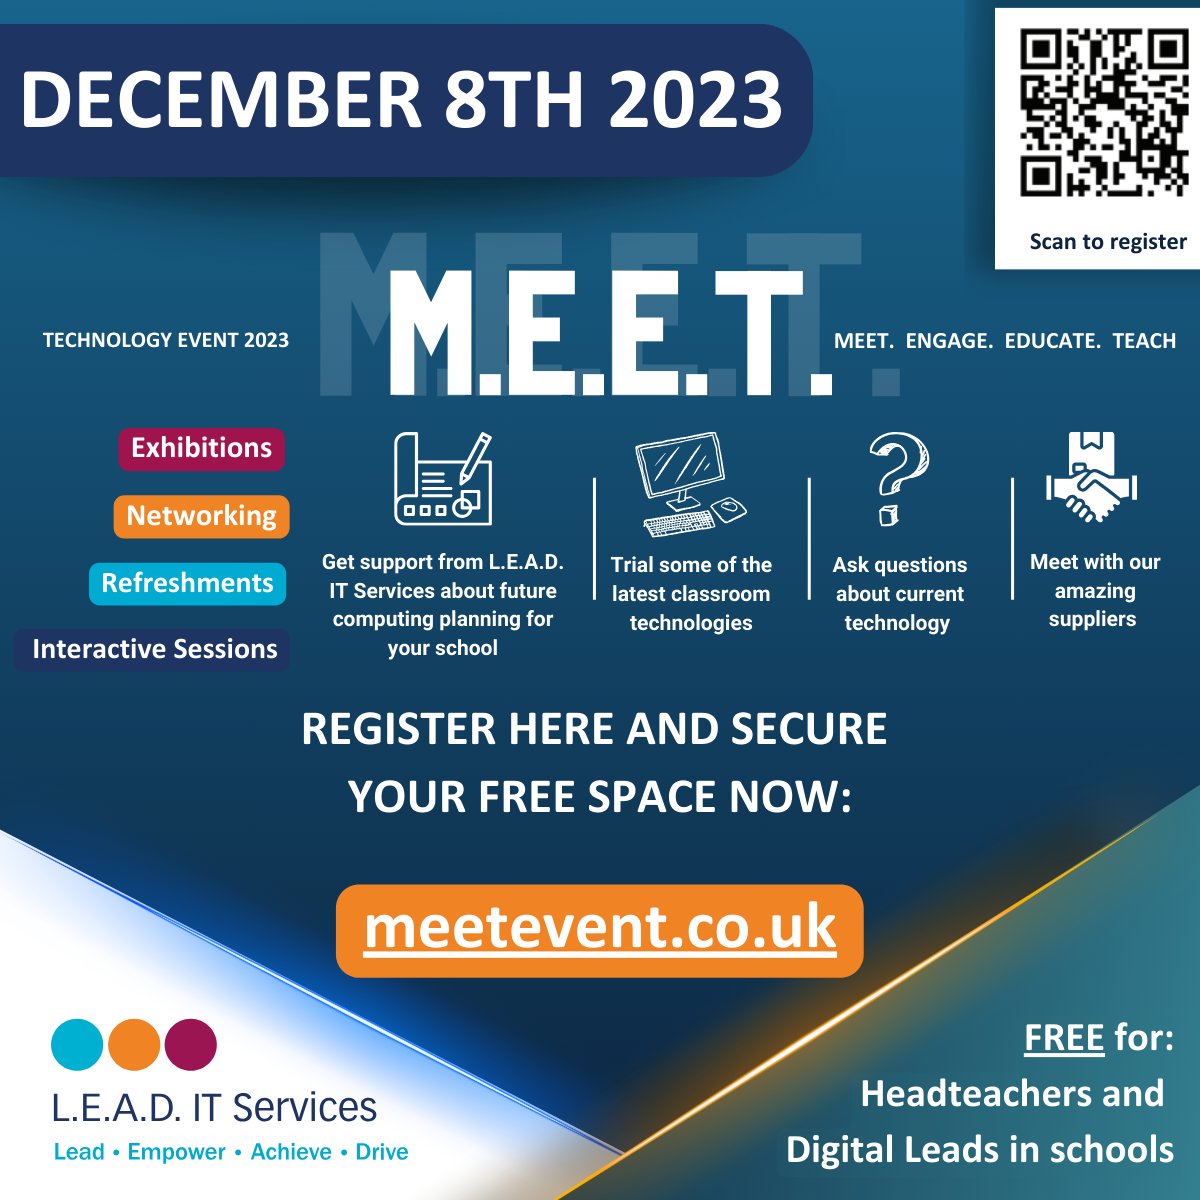 The Goal: Meet. Engage. Educate. Teach

M.E.E.T. is right around the corner and this is the last week to register!

Free registration at meetevent.co.uk by Friday 17th November.

Stay tuned to find out who our amazing speakers are!

#edtech #technologyconference #digital